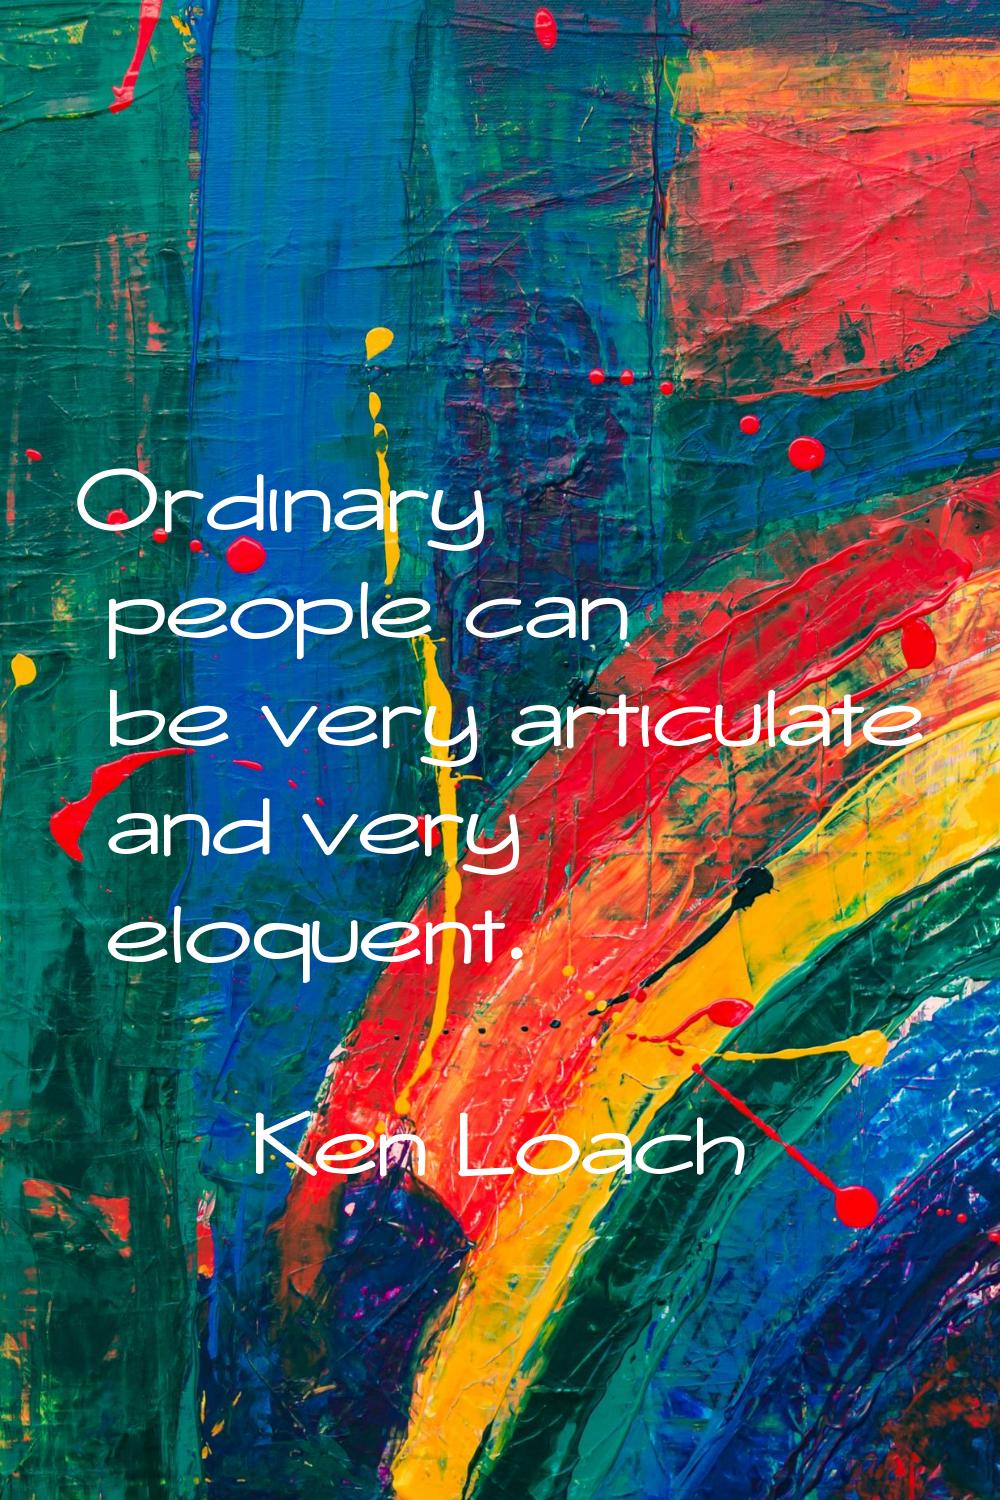 Ordinary people can be very articulate and very eloquent.